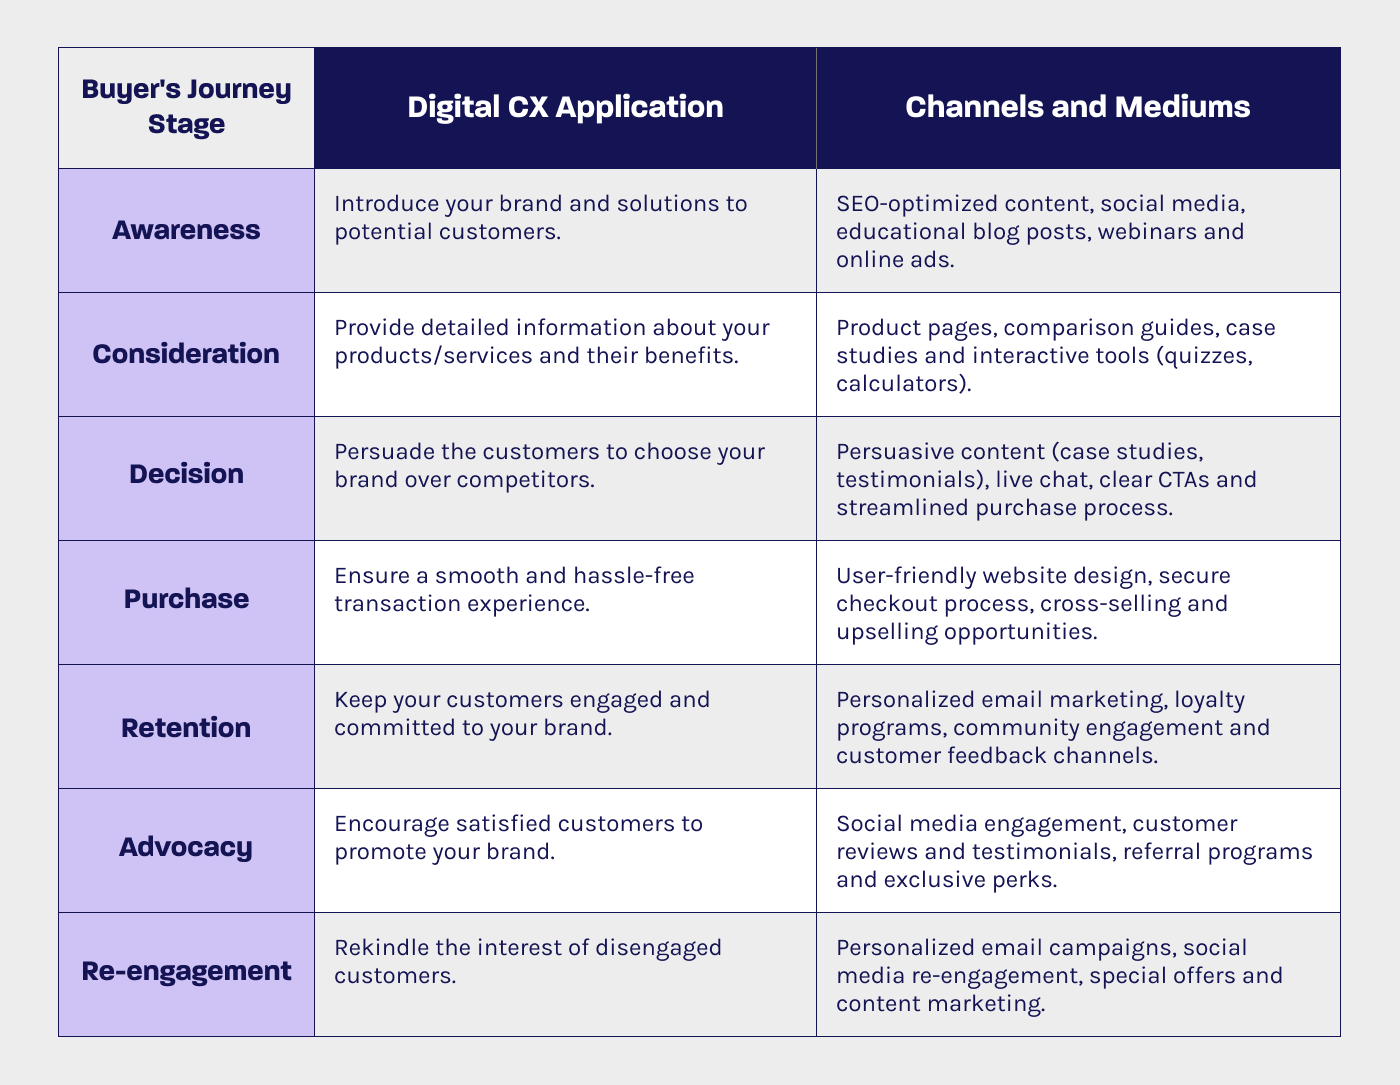 A table showing the 7 stages of the buyer journey vis-a-vis their Digital CX applications and relevant mediums and channels